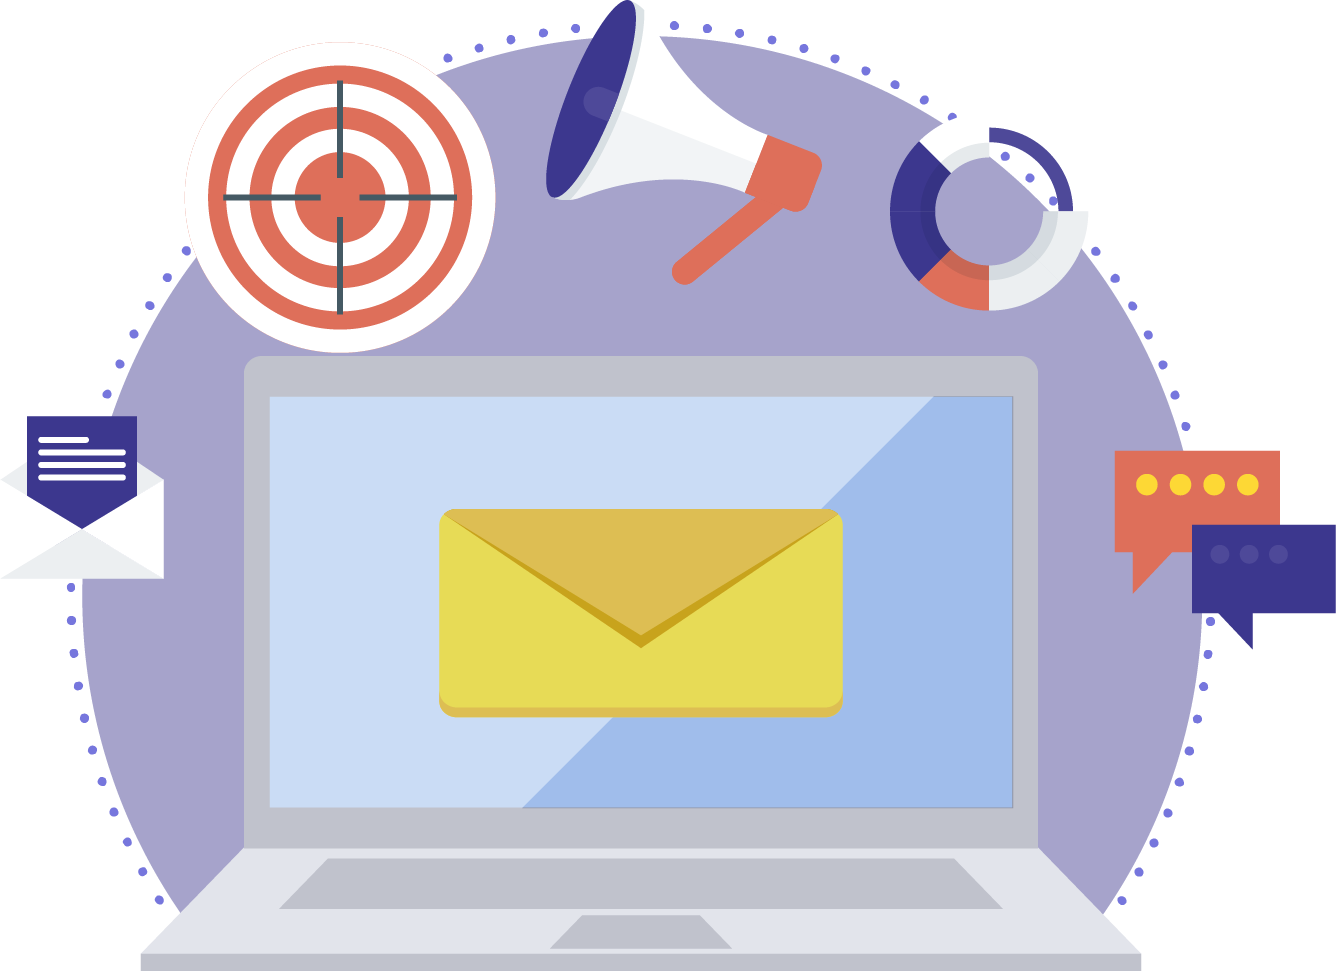 Email marketing adds value to your communication strategy.